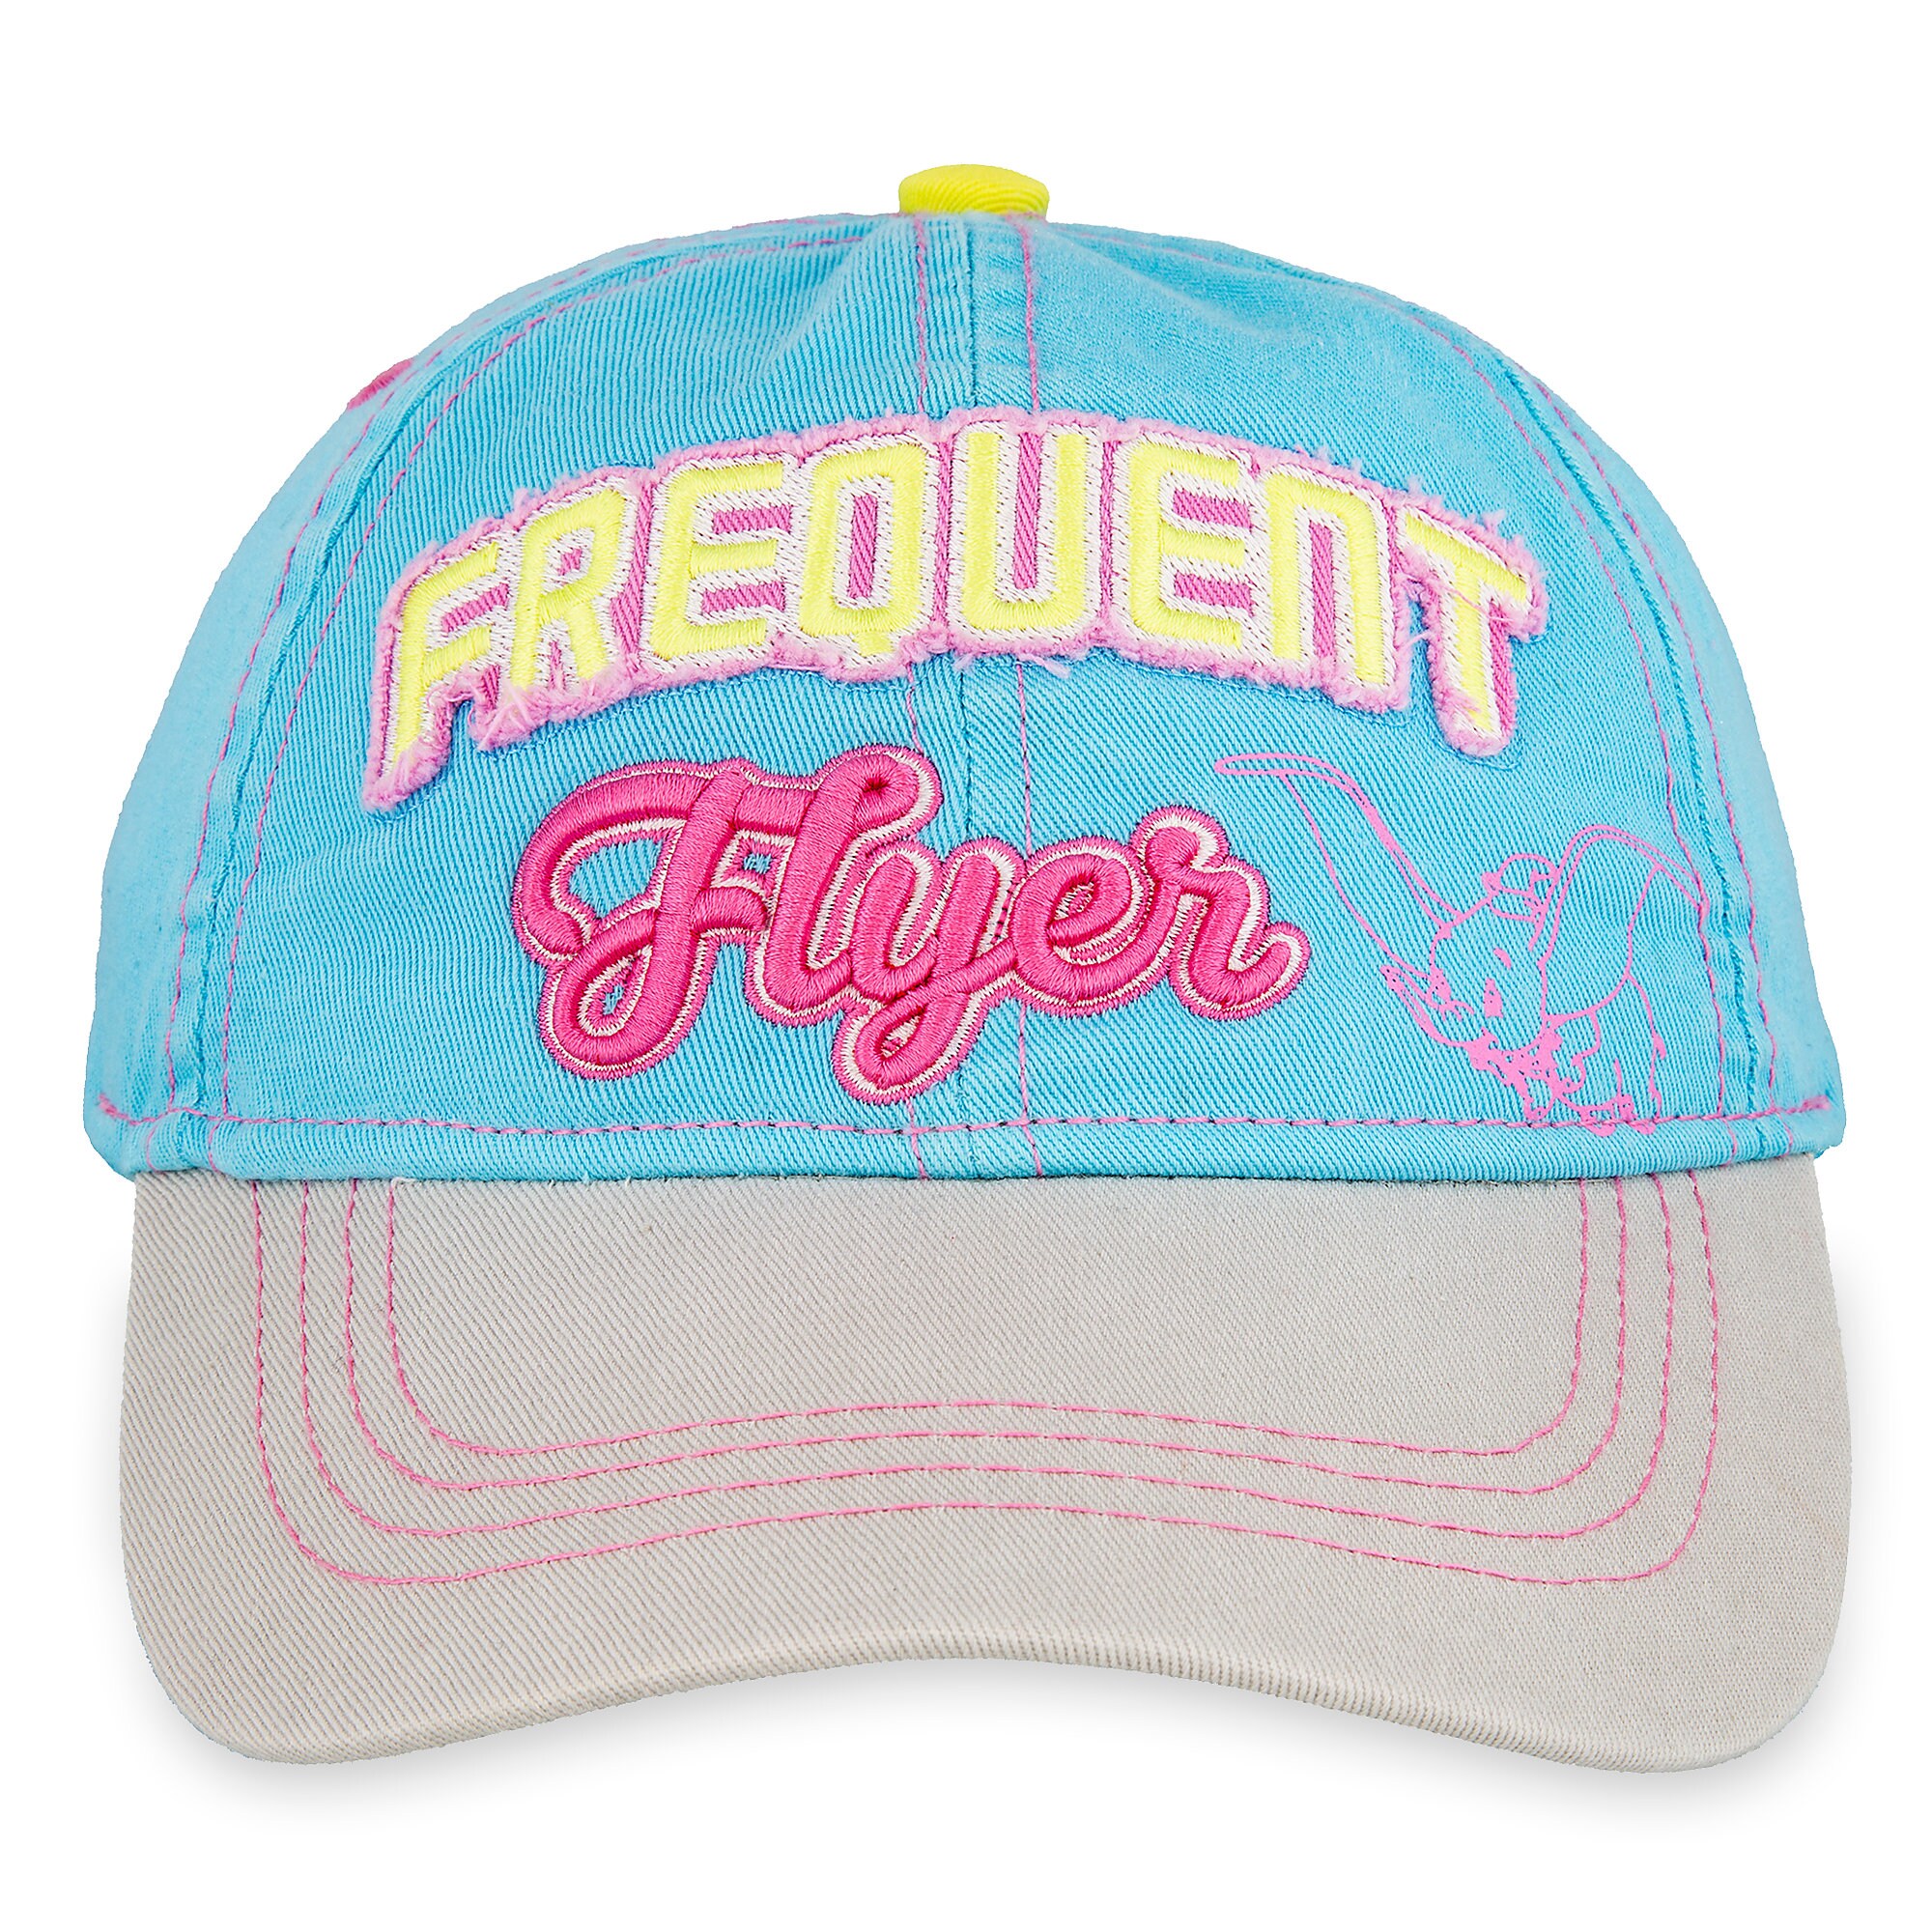 Dumbo ''Frequent Flyer'' Baseball Cap for Adults